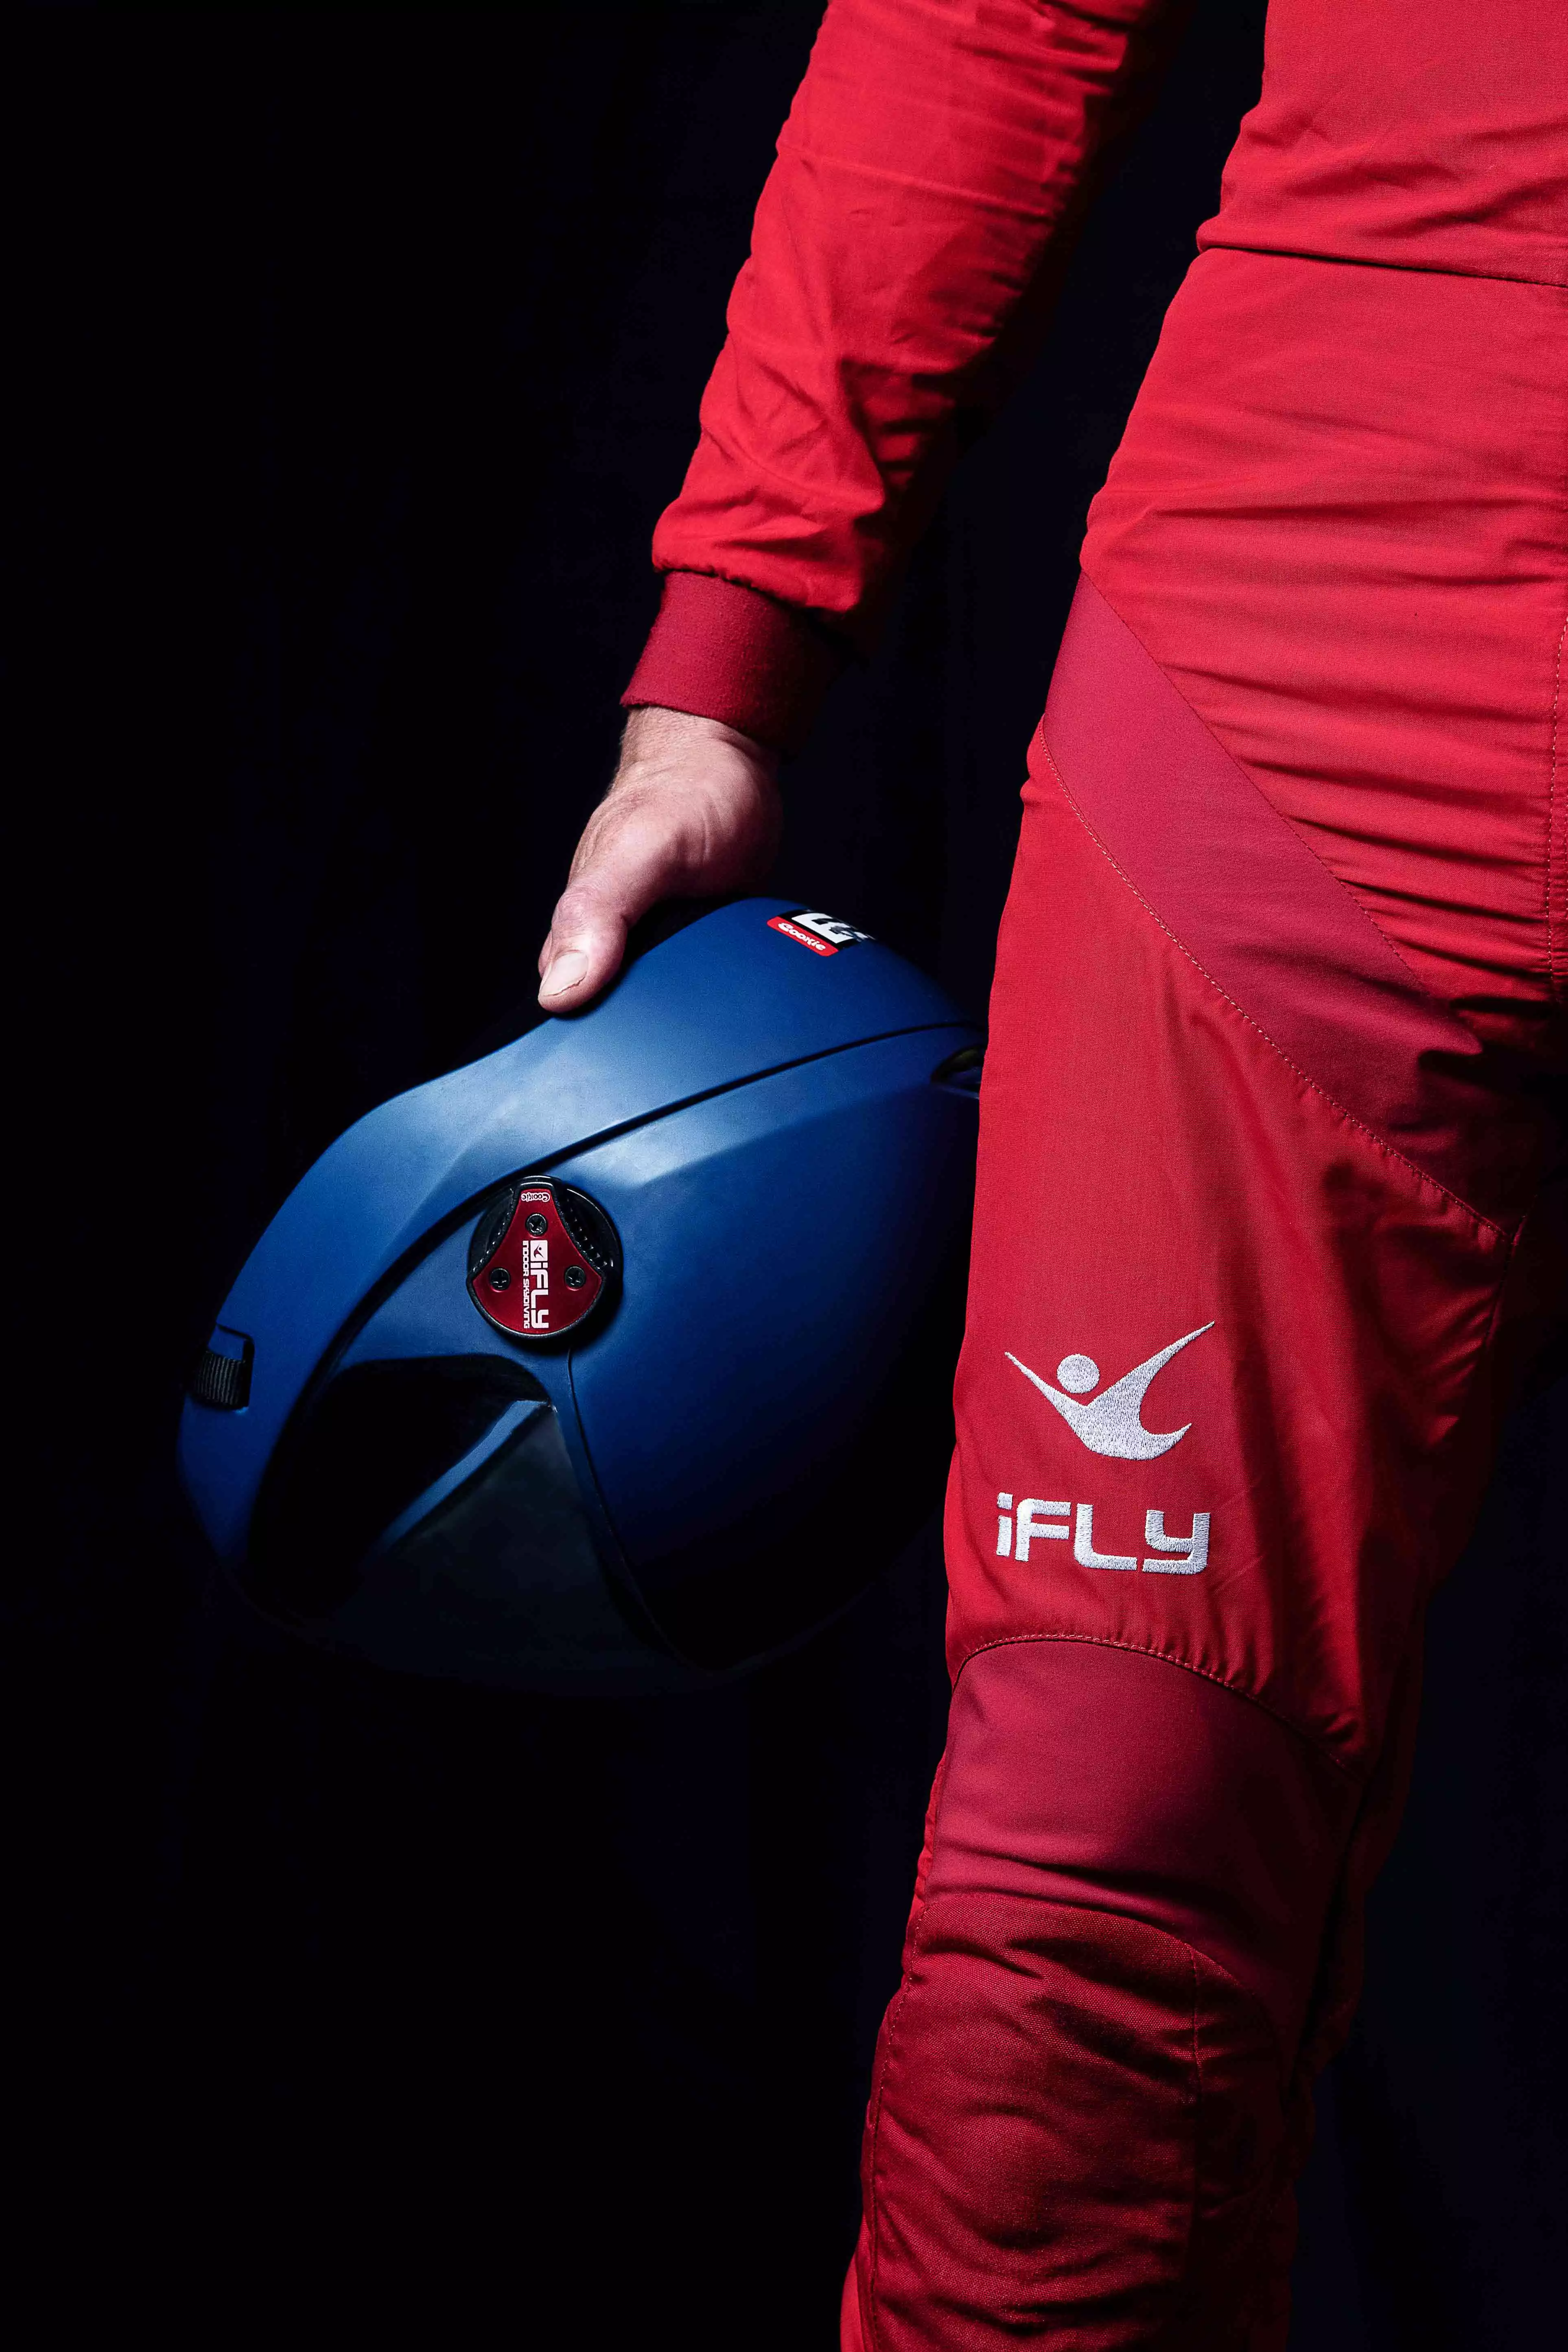 Skydiving adult in a red iFLY skydiving suit holding a blue helmet